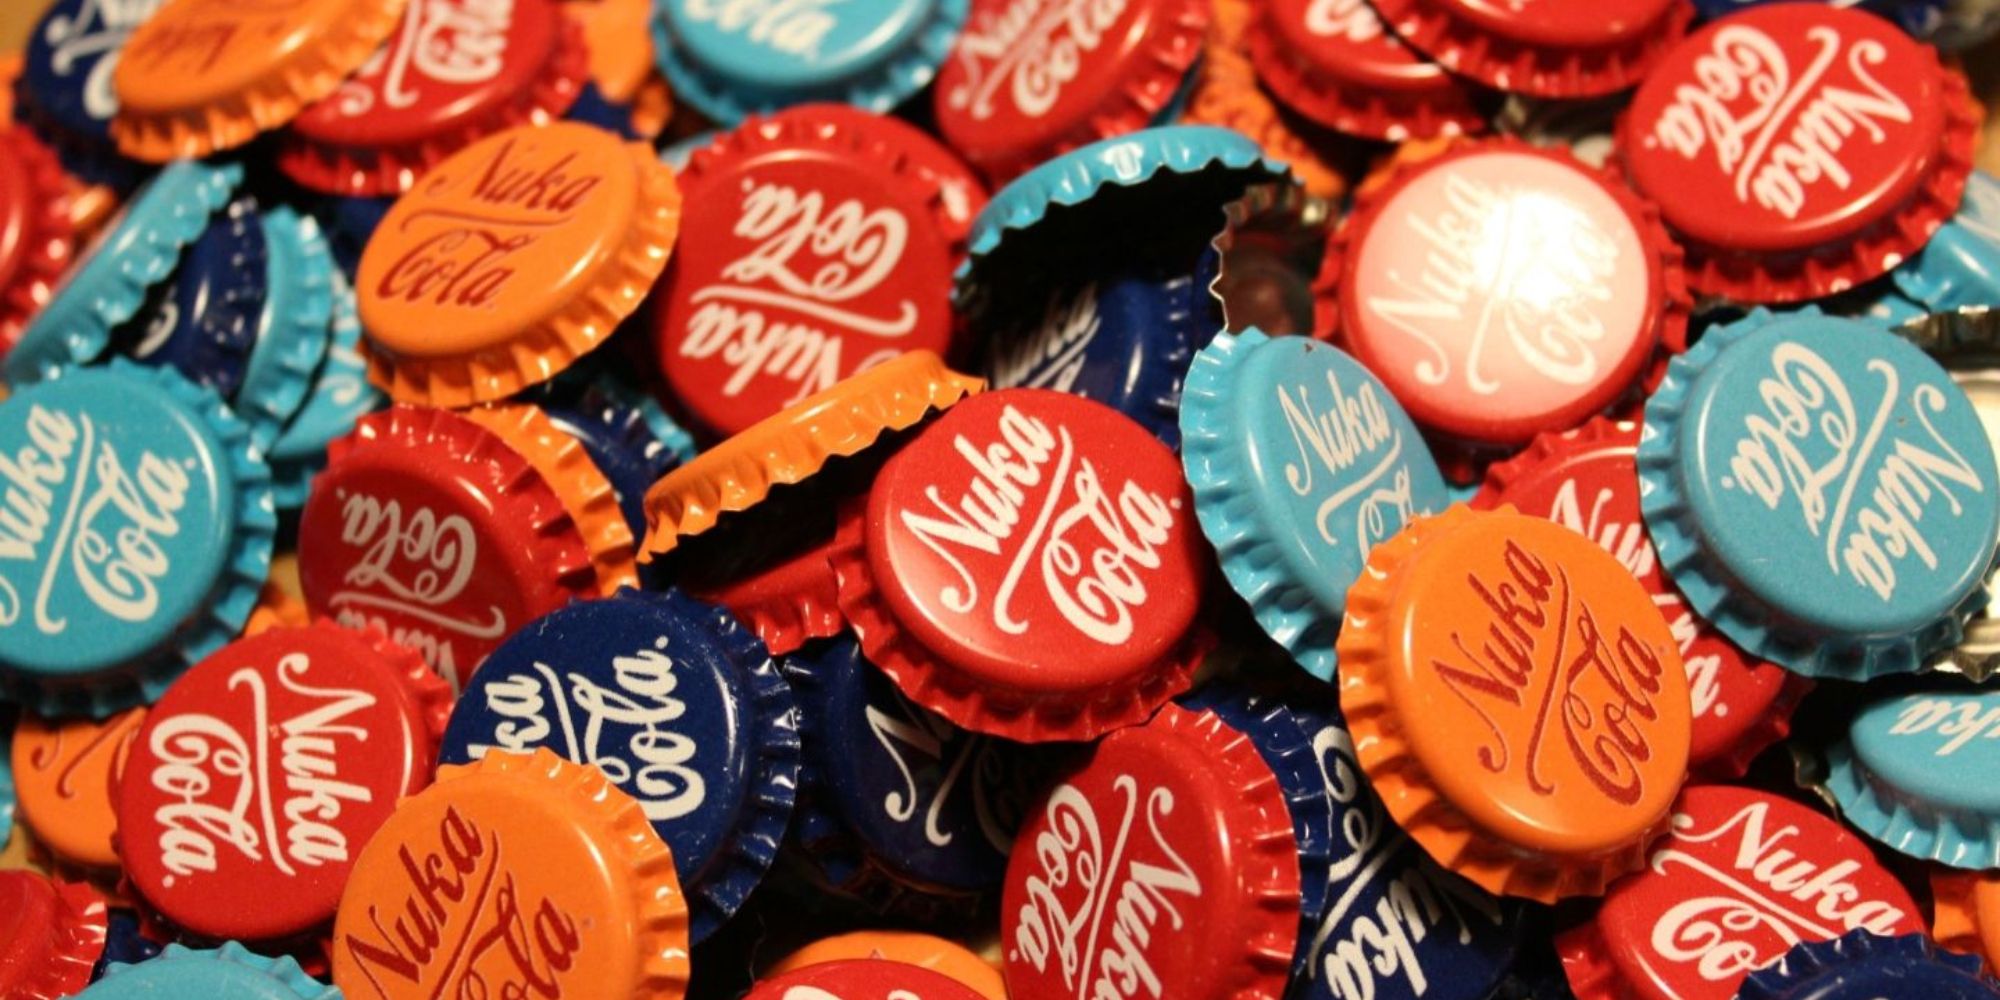 Fictional Currencies a collection of red, blue and orange Nuka Cola bottle caps from Fallout